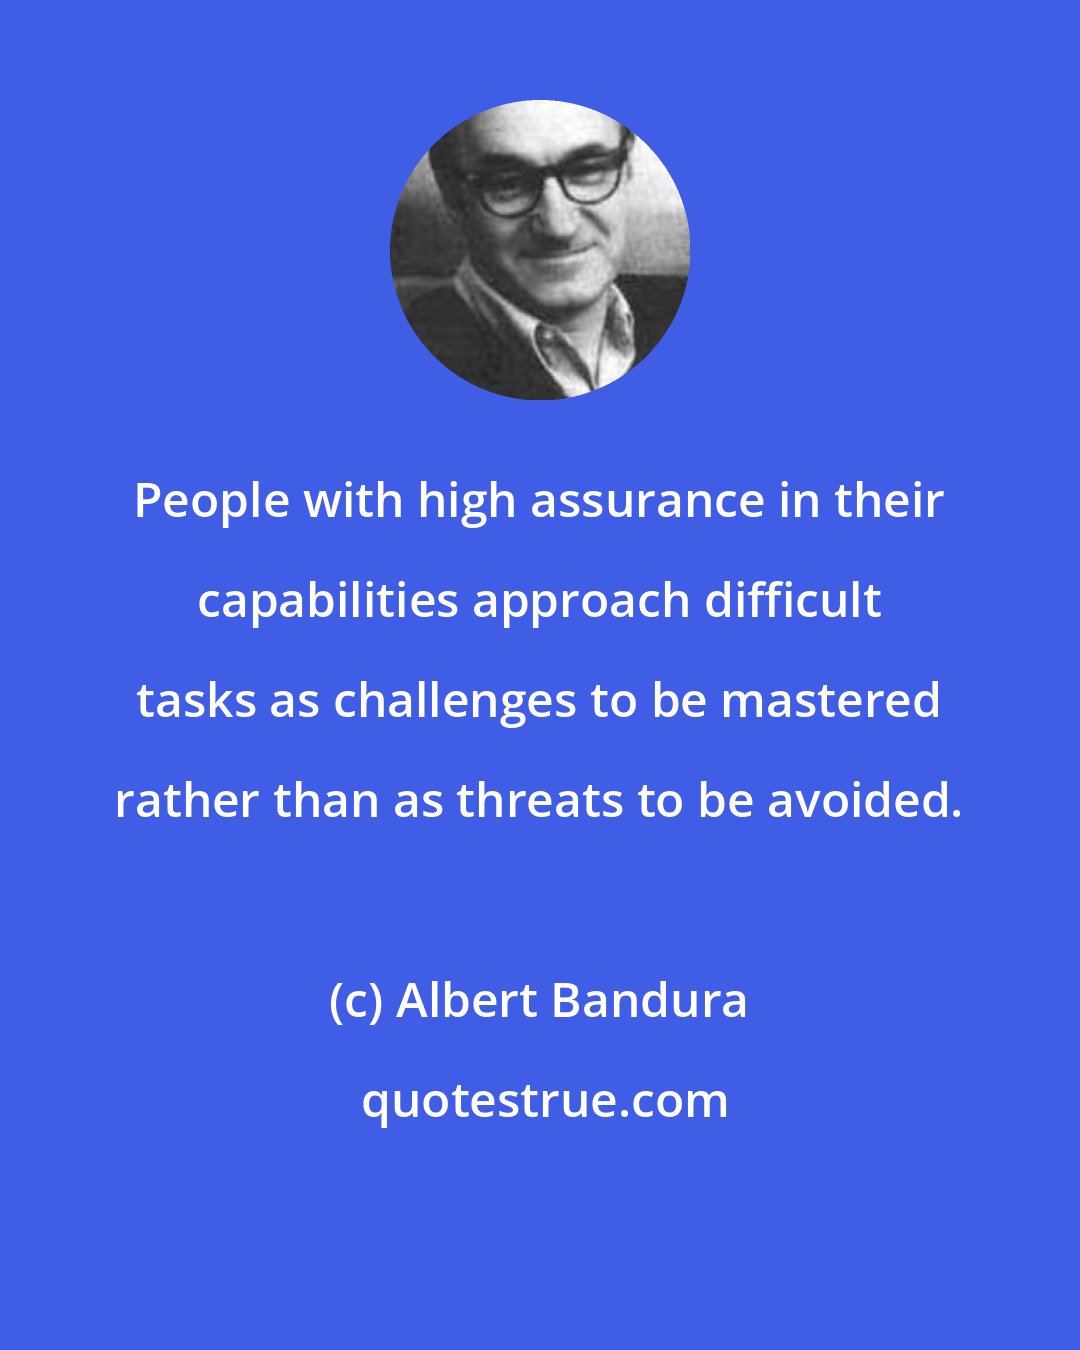 Albert Bandura: People with high assurance in their capabilities approach difficult tasks as challenges to be mastered rather than as threats to be avoided.